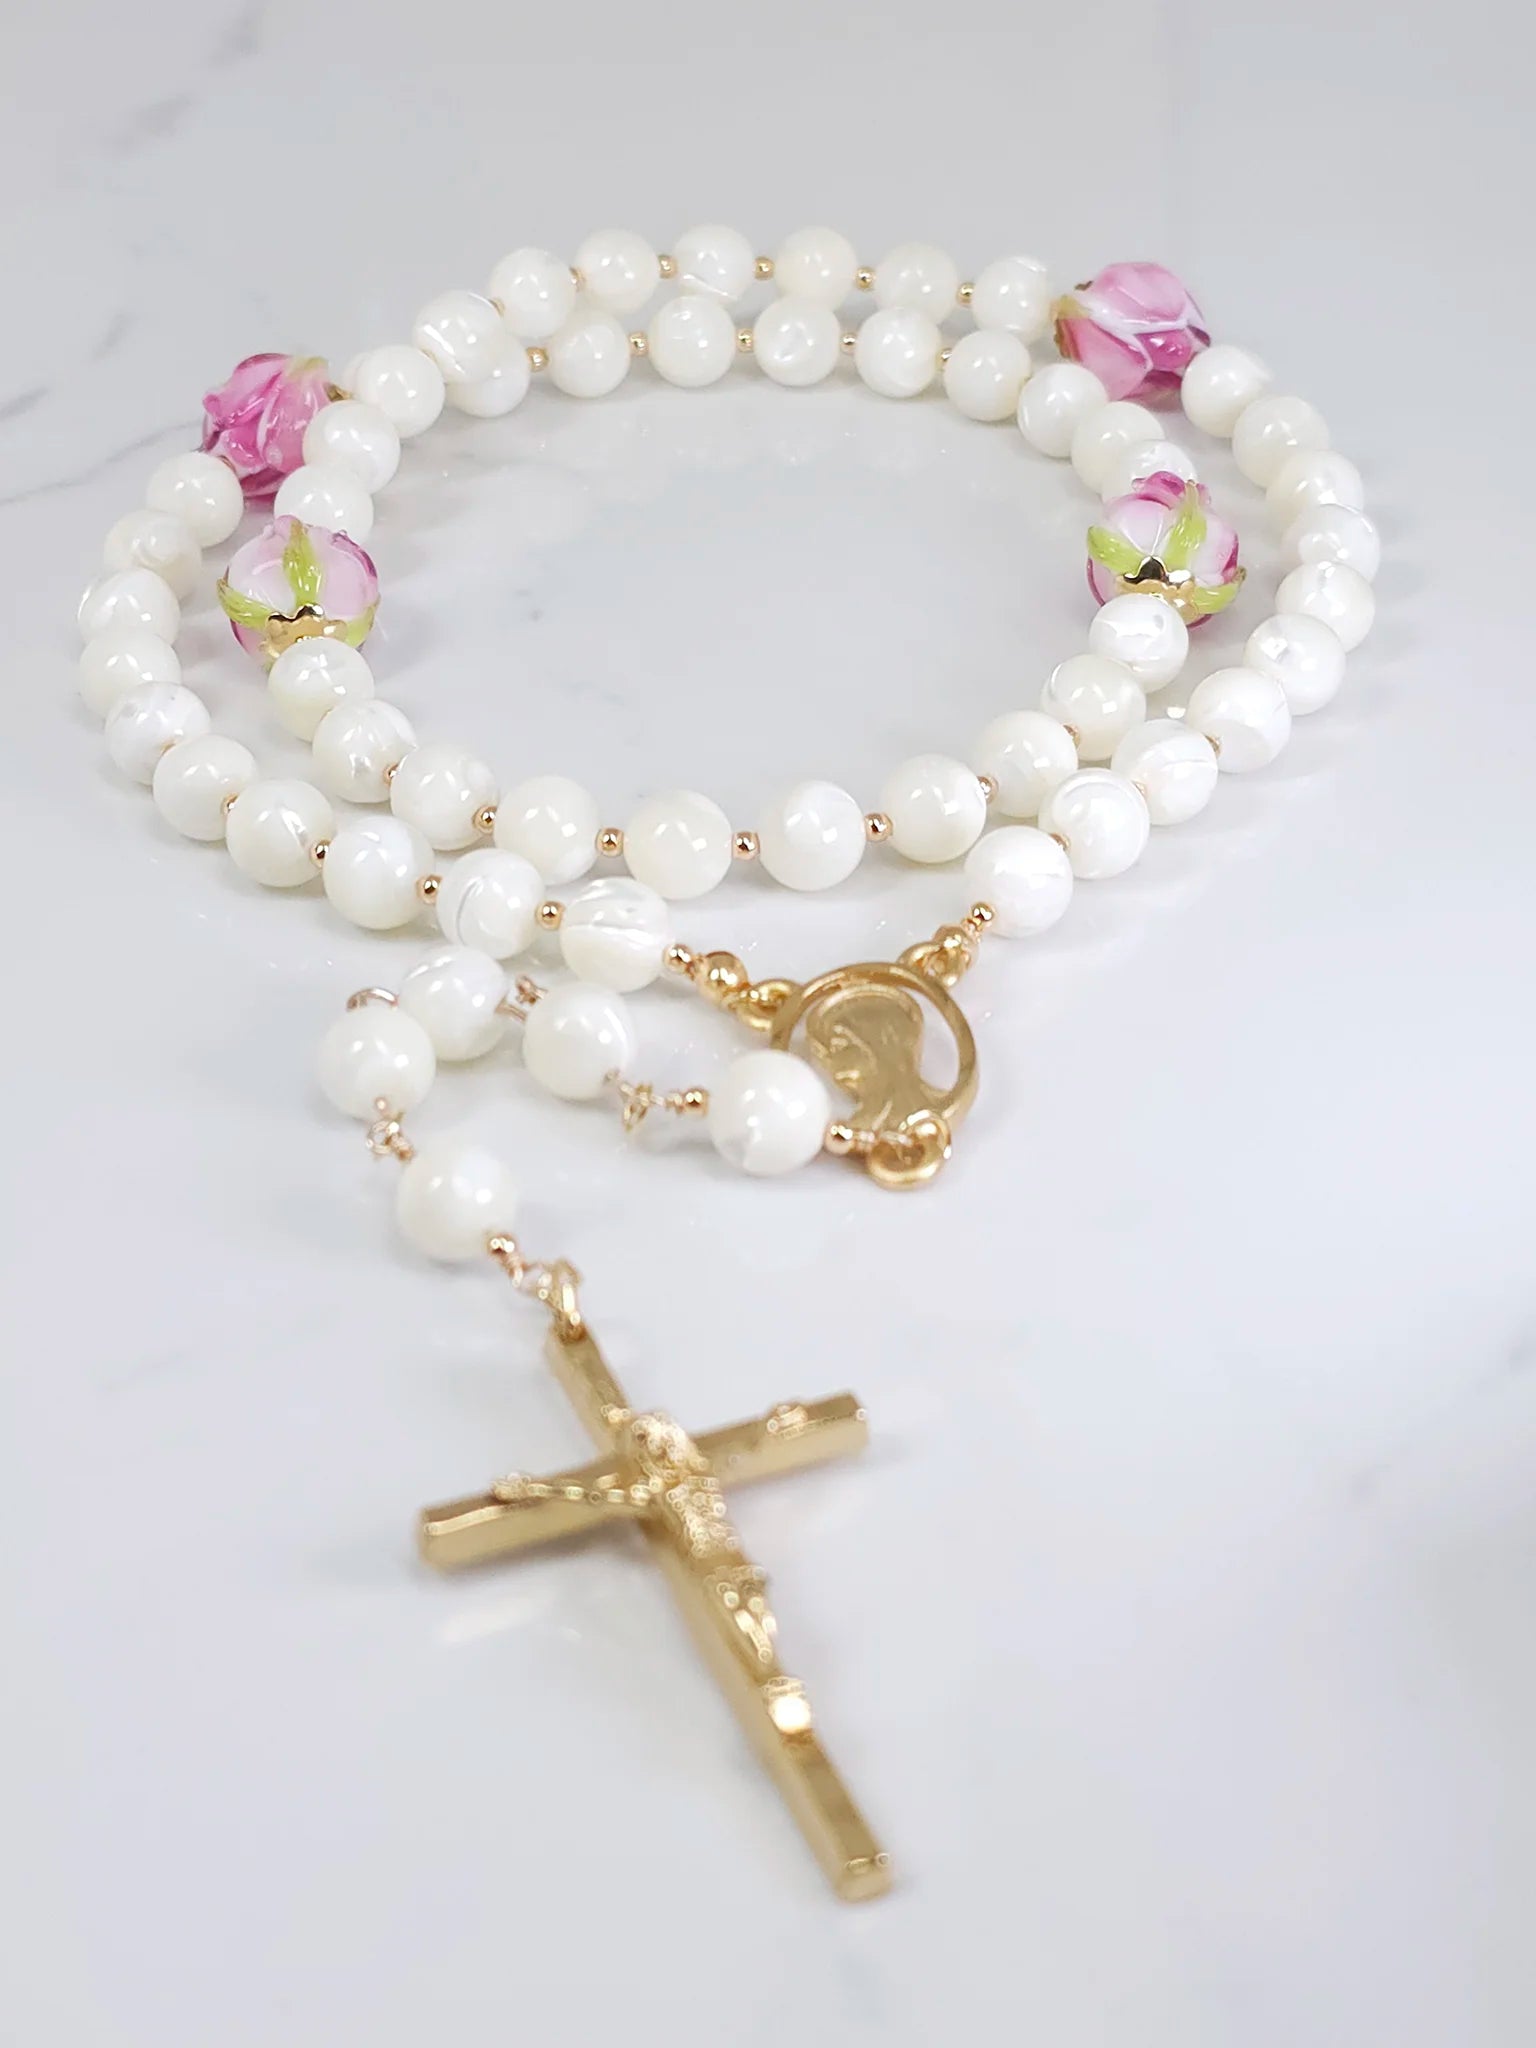 Bridal rosary emphasizing Mother of Pearl and pink rosebud flower beads.